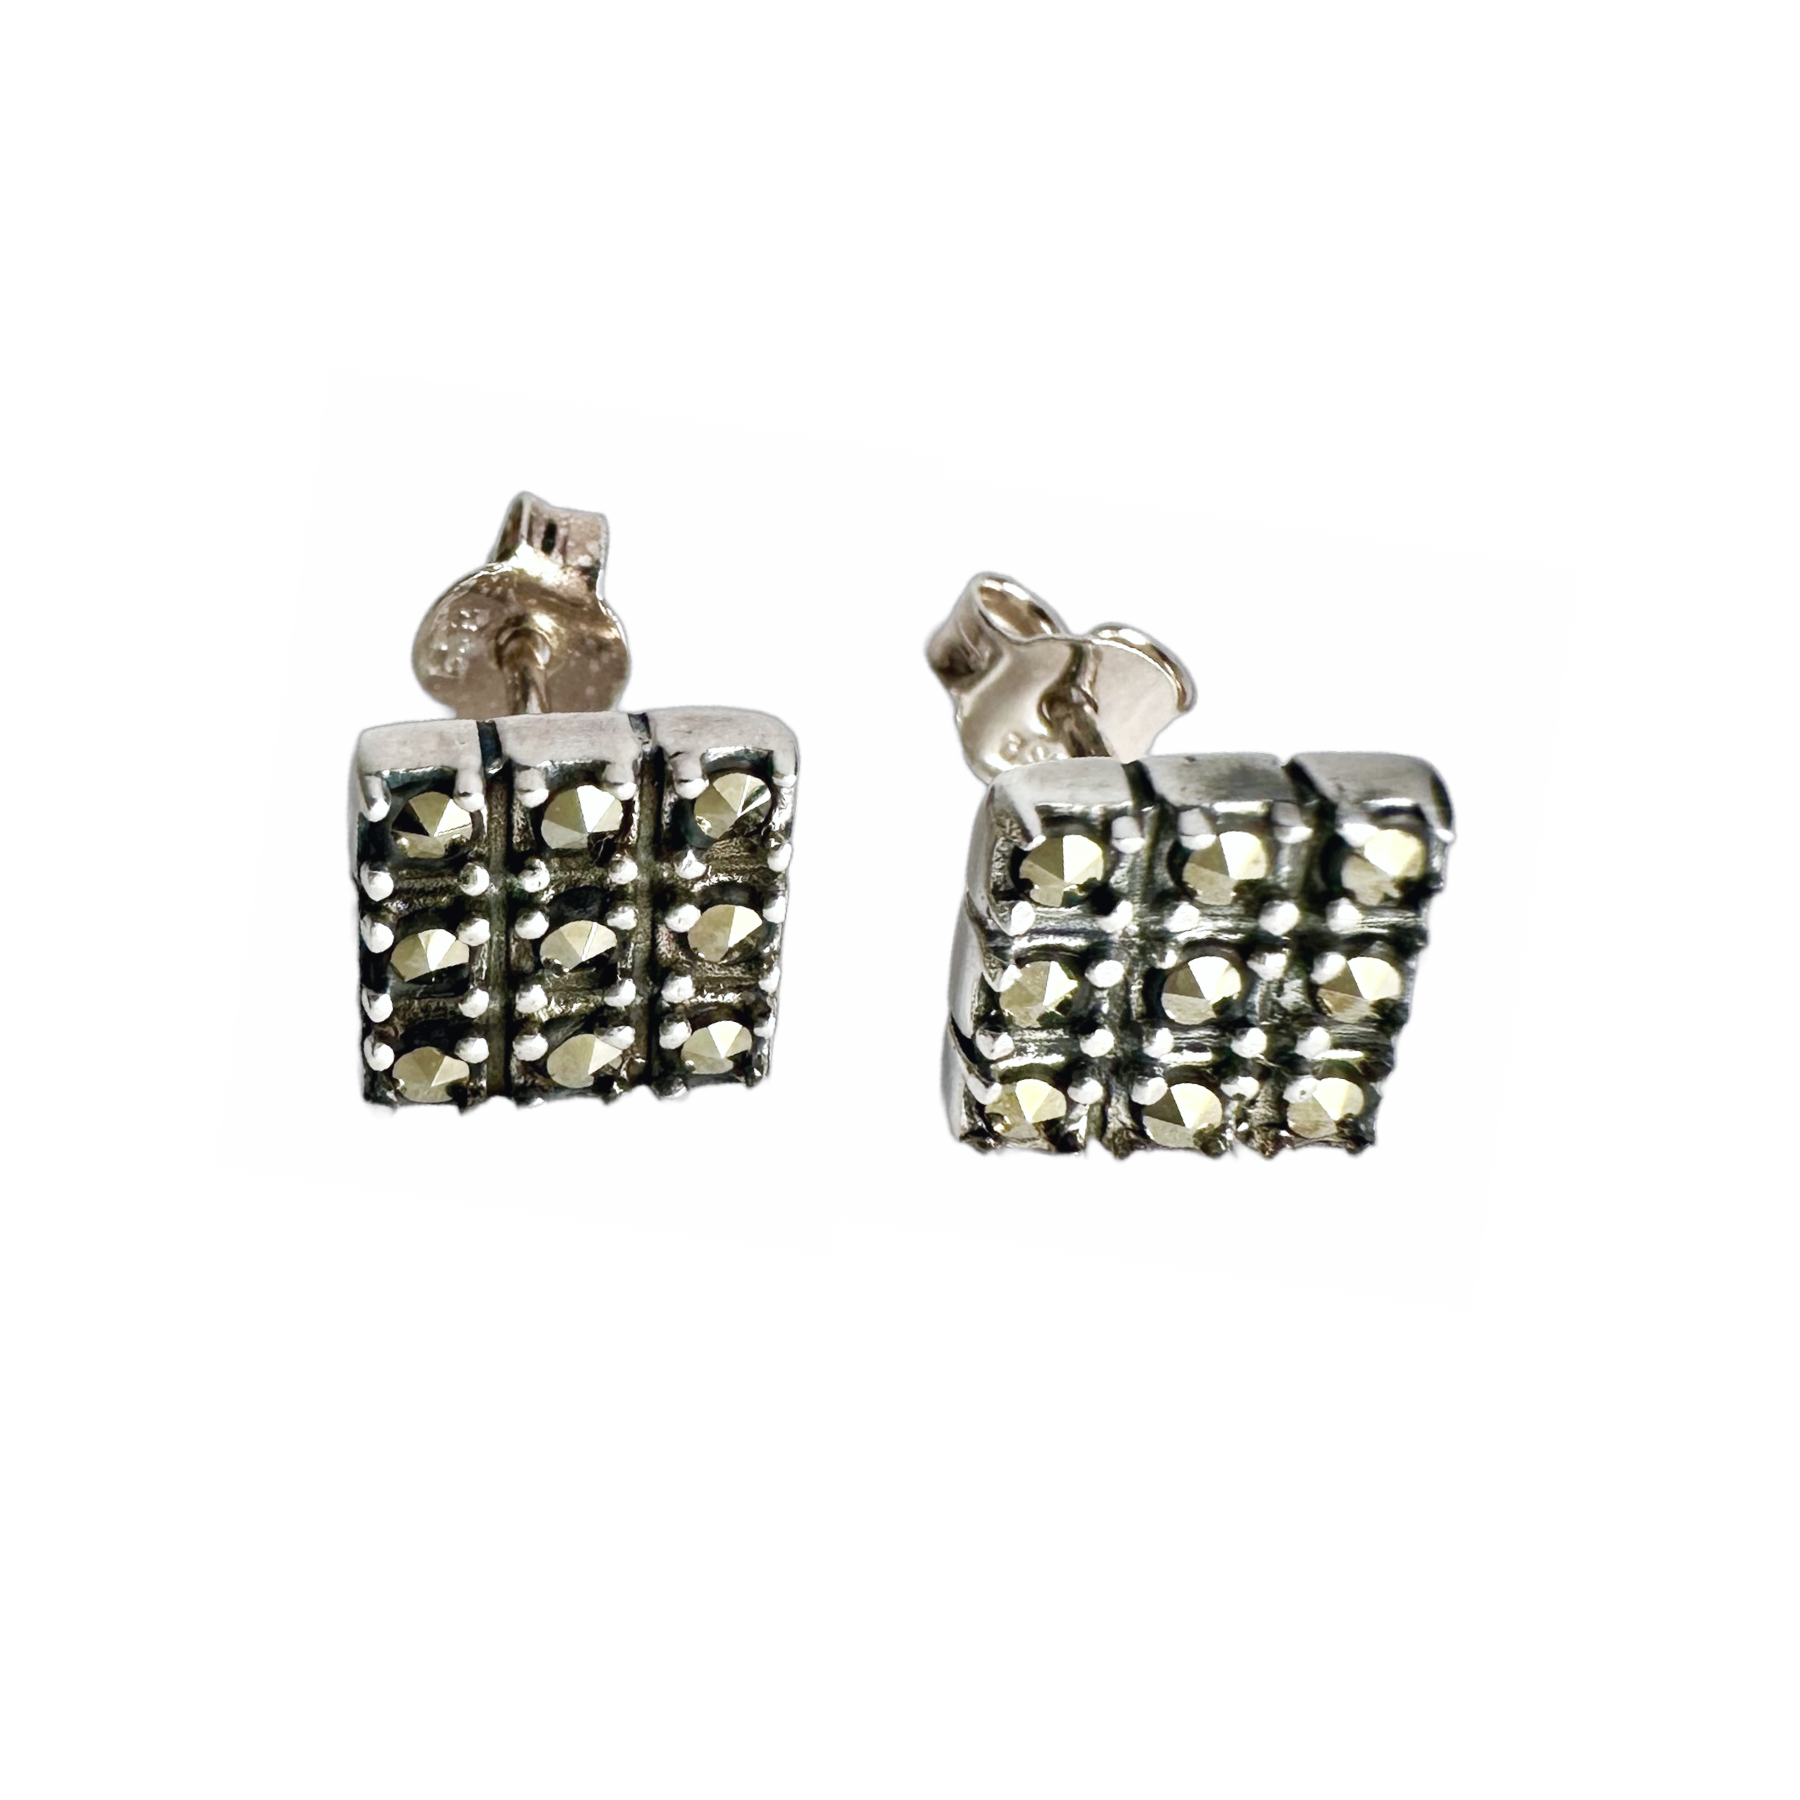 Square Sterling Silver Marcasite Cluster Earrings